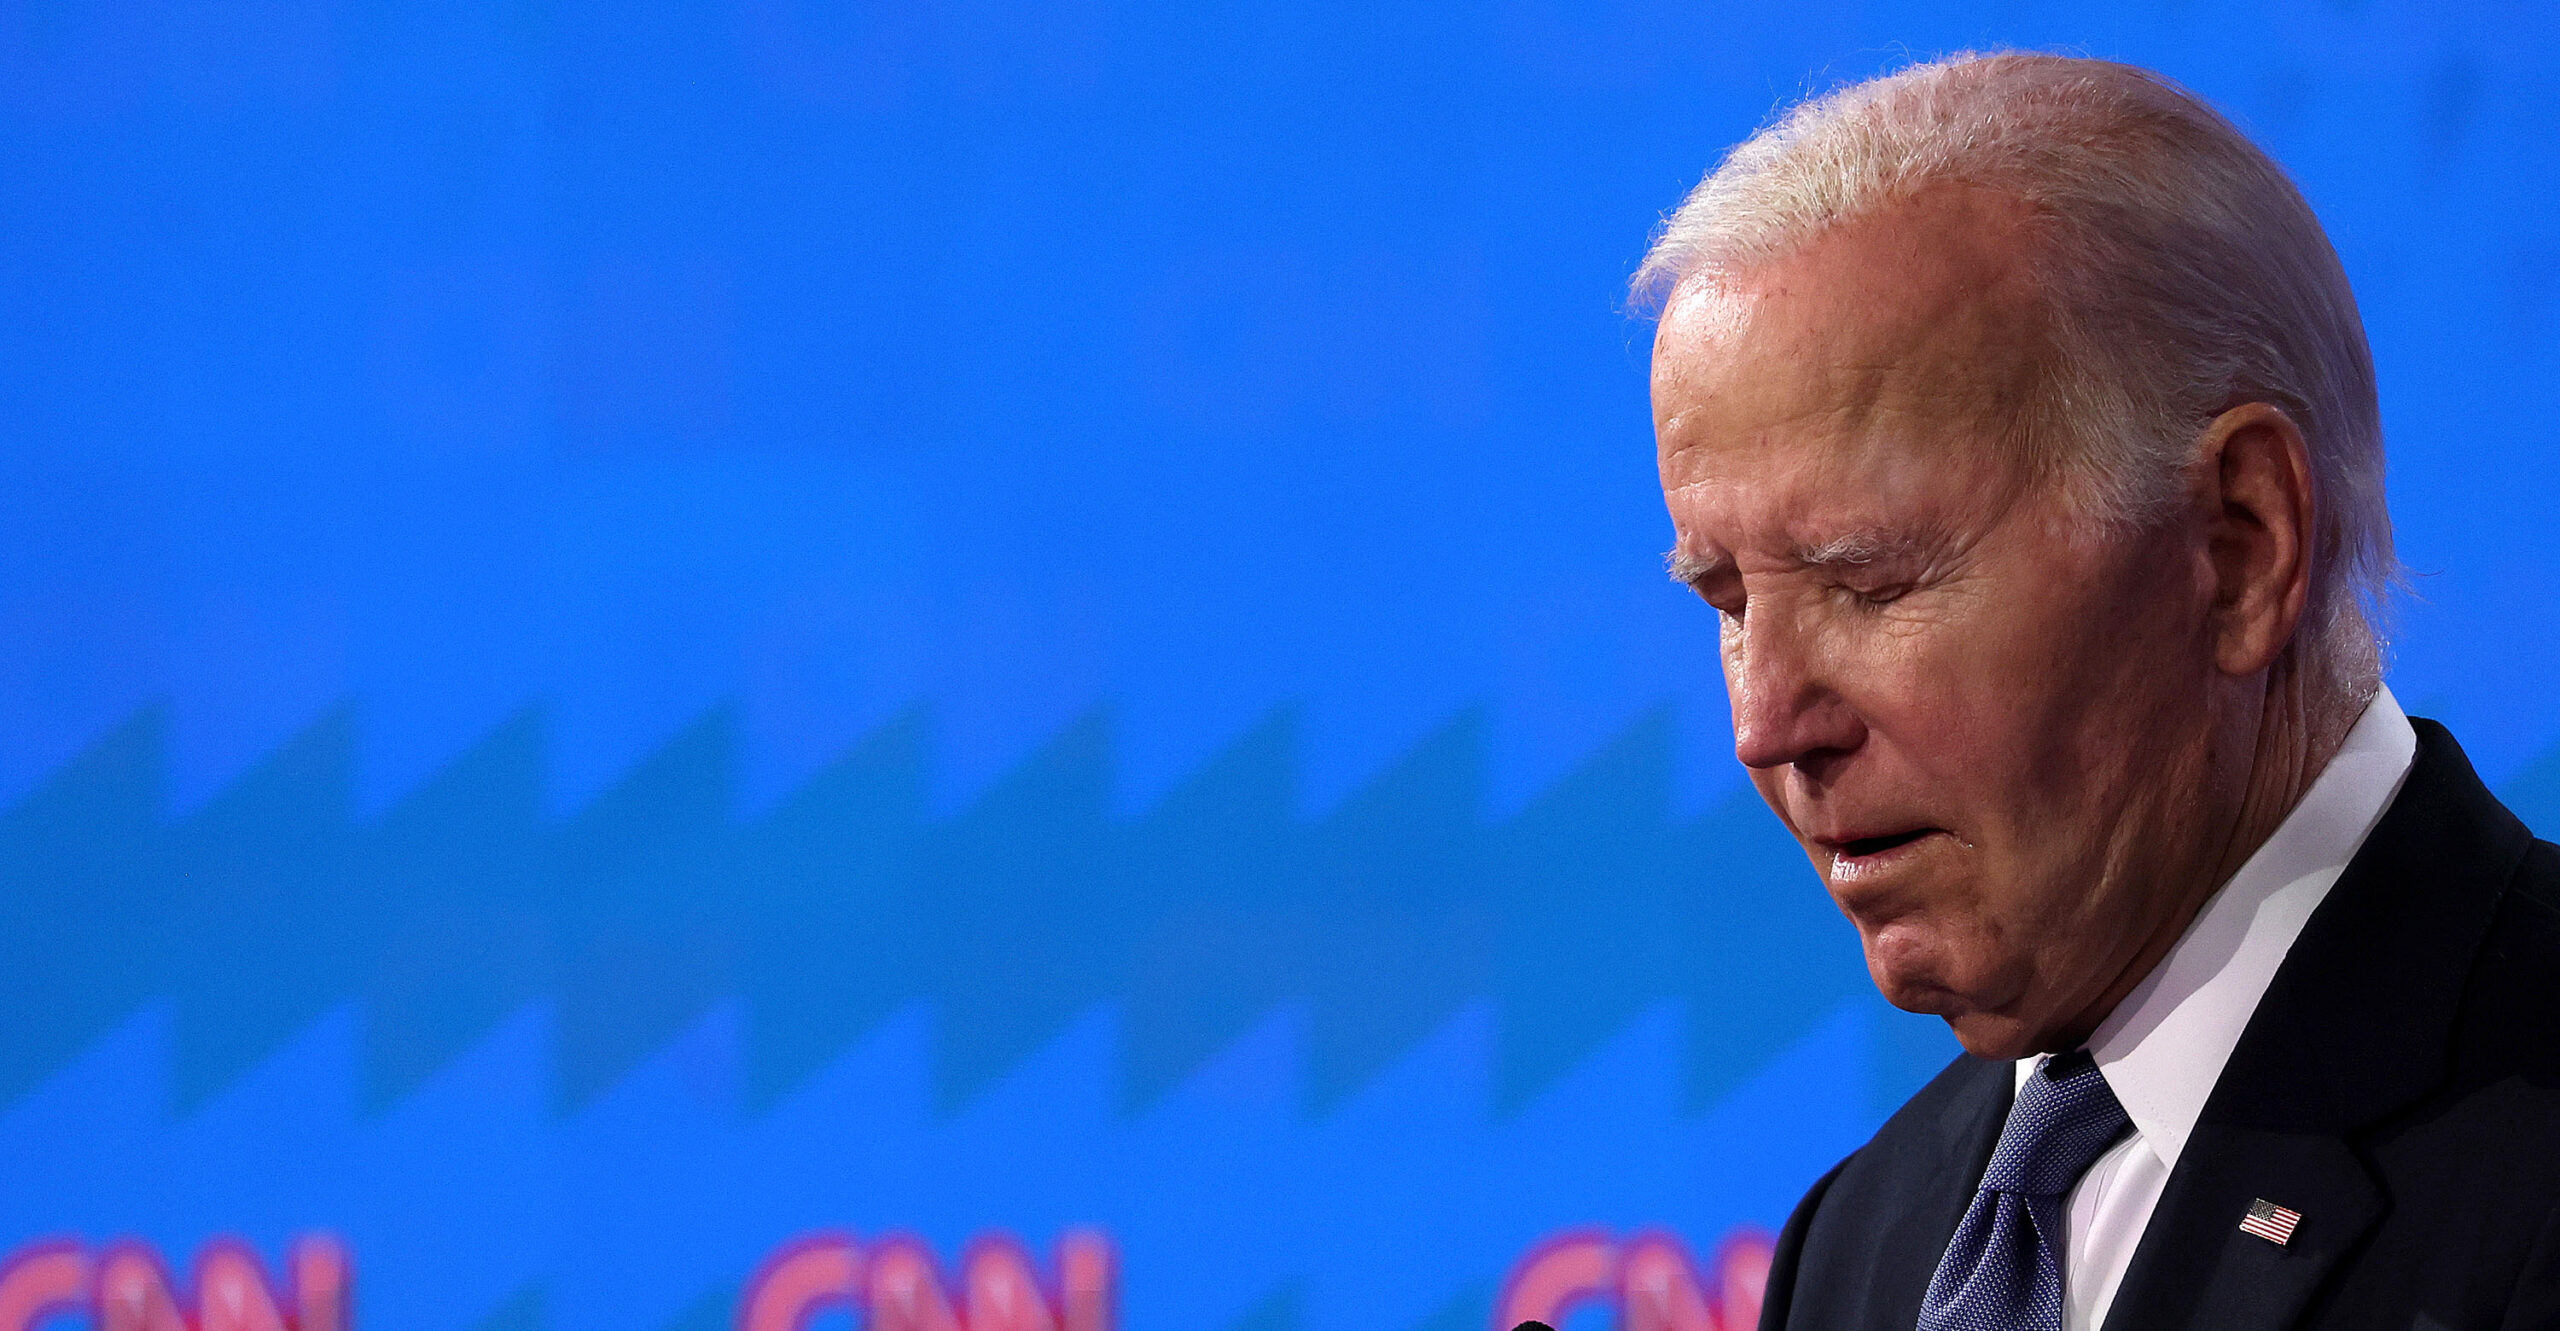 Majority of Voters Want to Ditch Biden After Disastrous Debate, Poll Shows